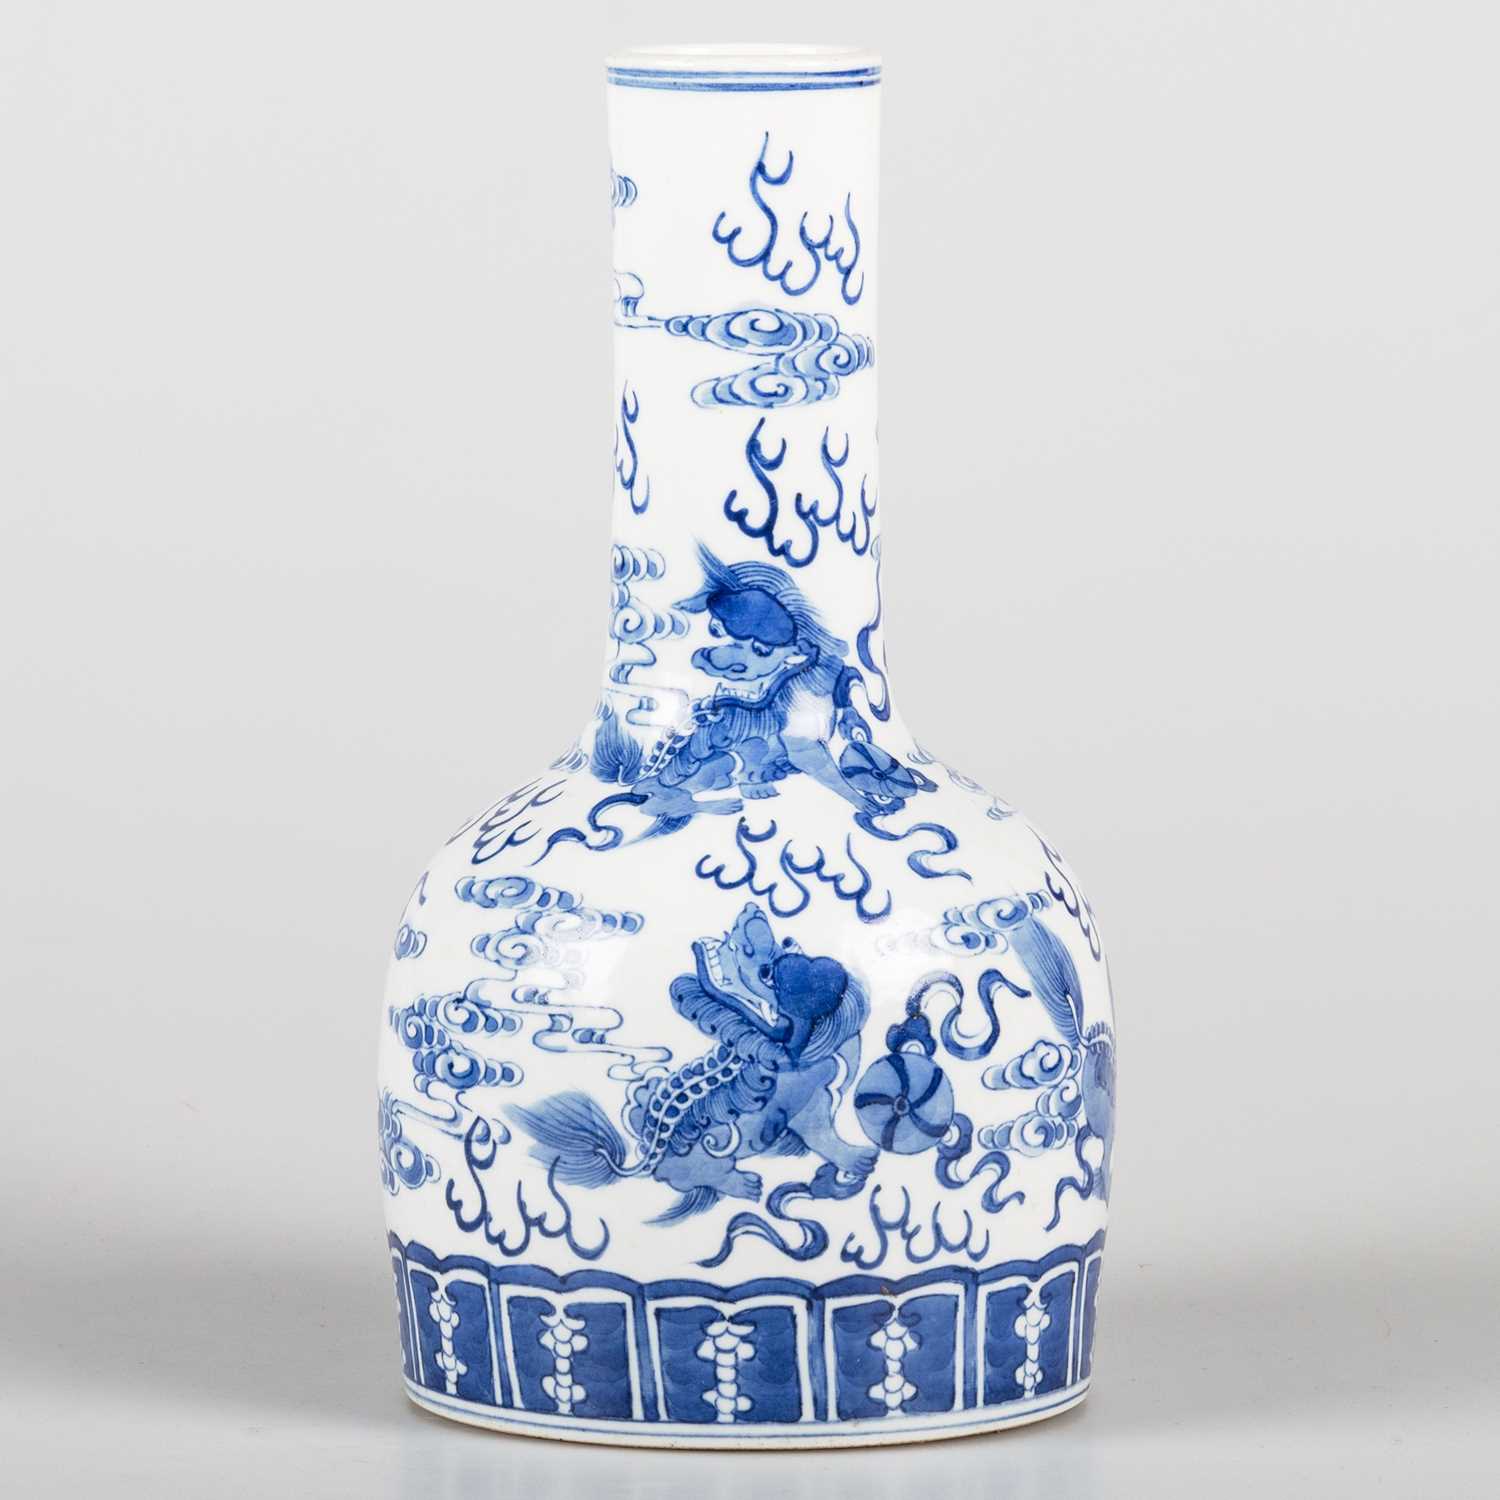 A CHINESE BLUE AND WHITE MALLET FORM VASE, QING DYNASTY, 18TH/19TH CENTURY - Image 2 of 9